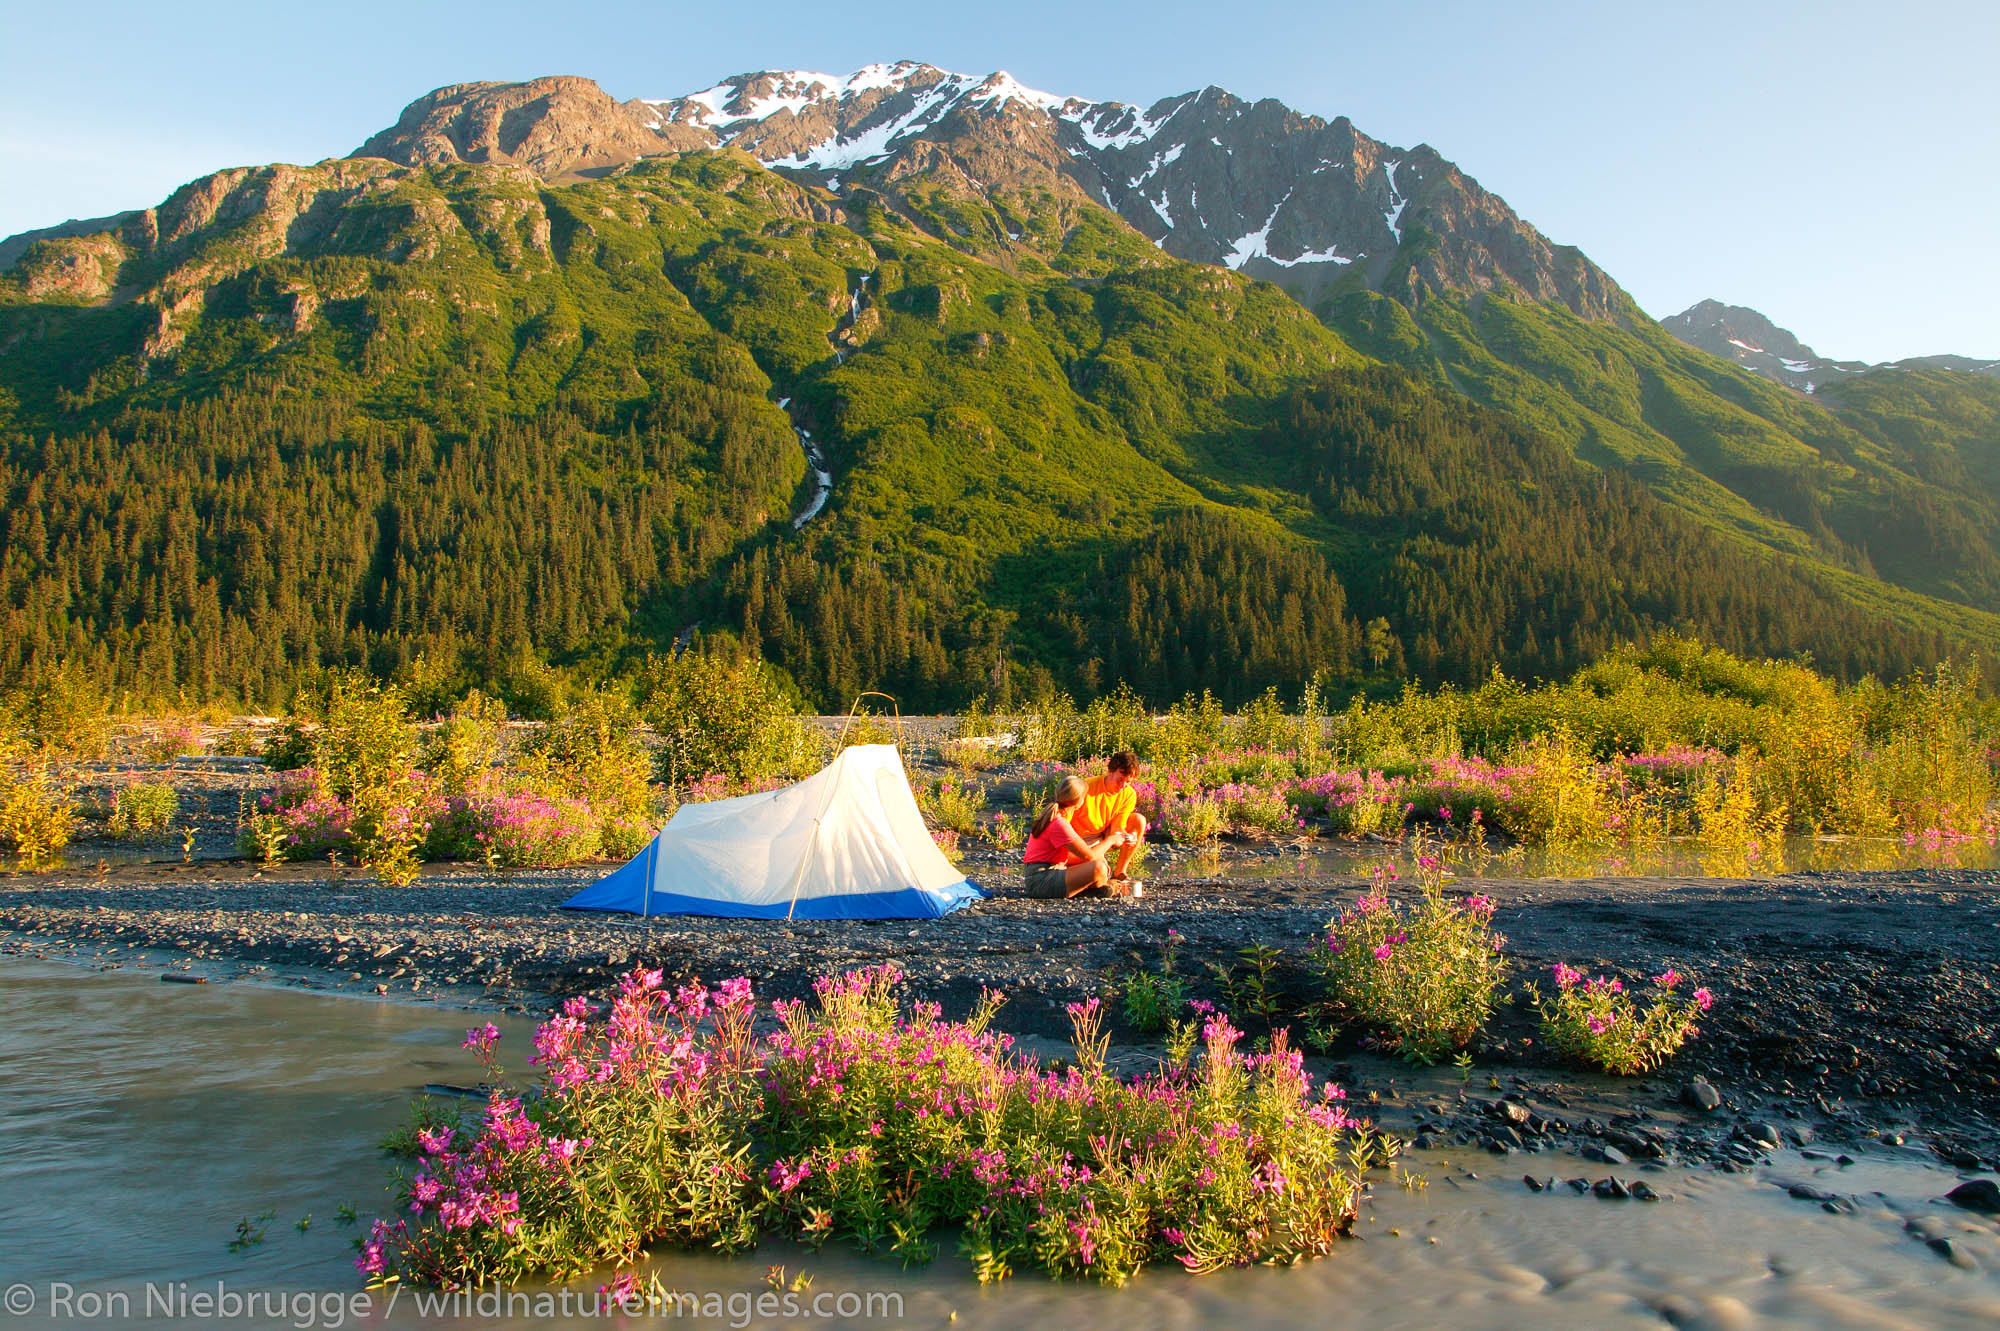 Tent camping near the Resurrection River with Mt. Benson in background.  Chugach National Forest and Kenai Fjords National Park...